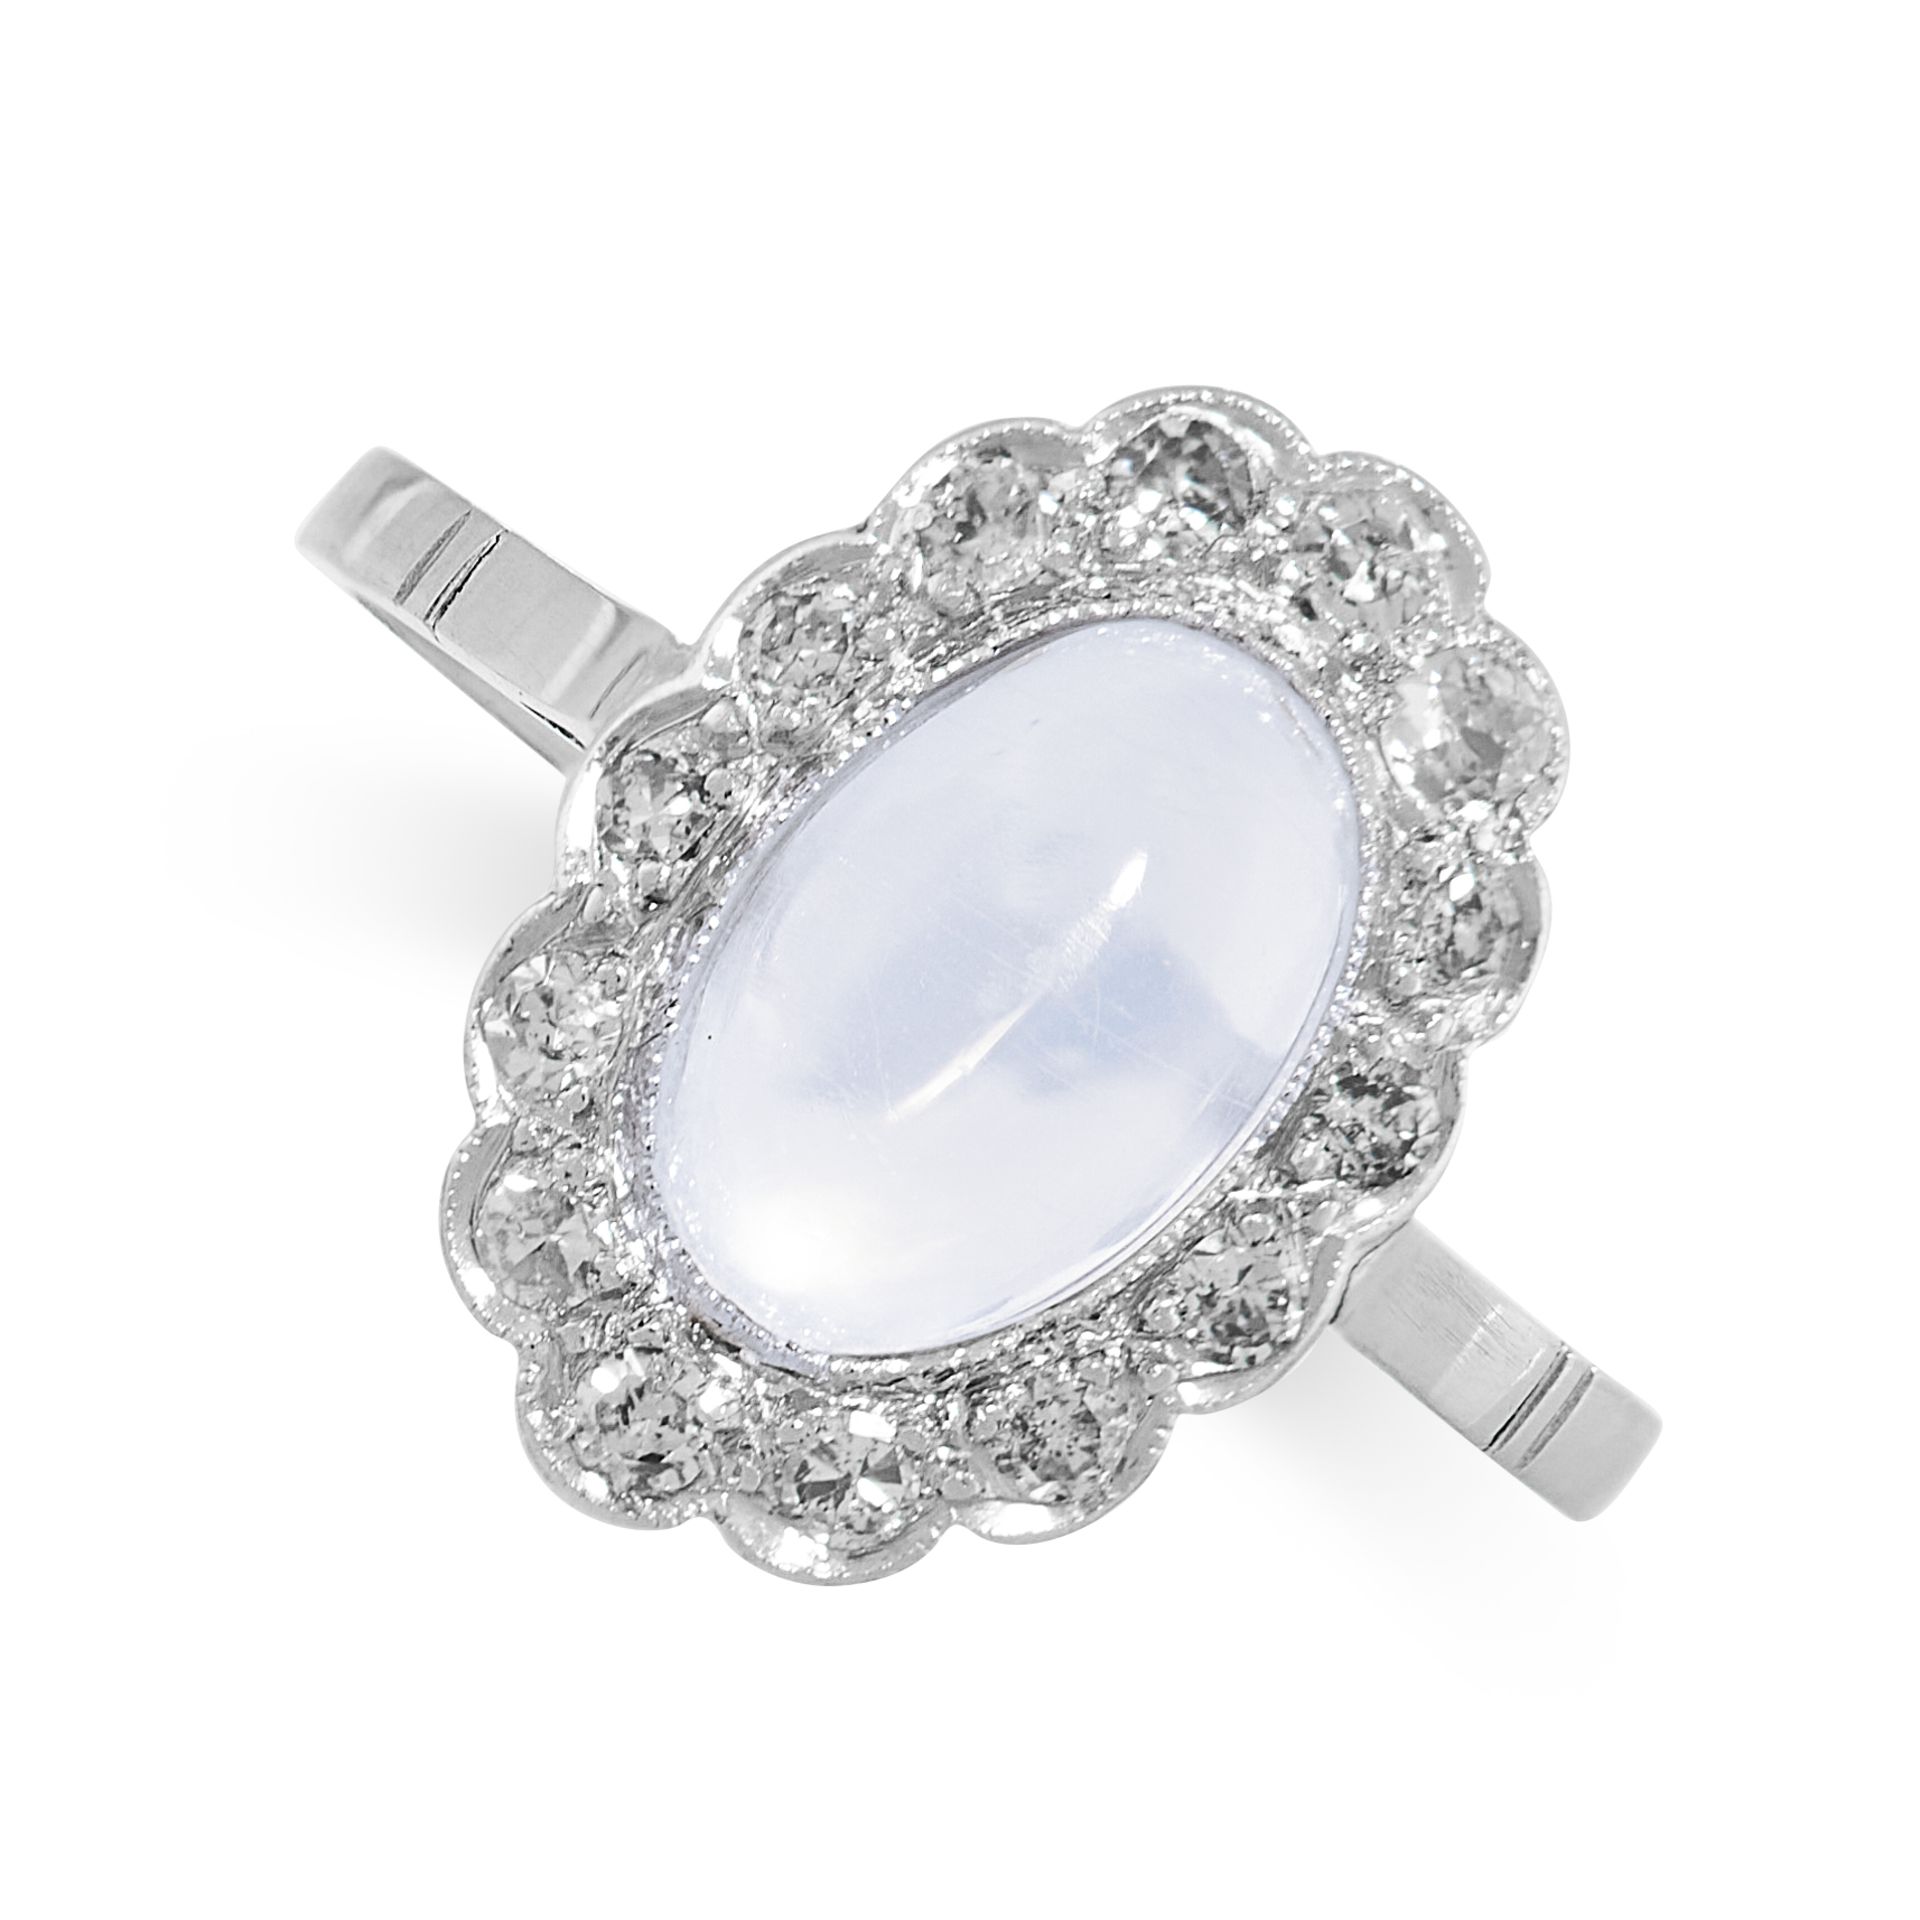 A MOONSTONE AND DIAMOND DRESS RING in platinum, set with an oval cabochon moonstone within a